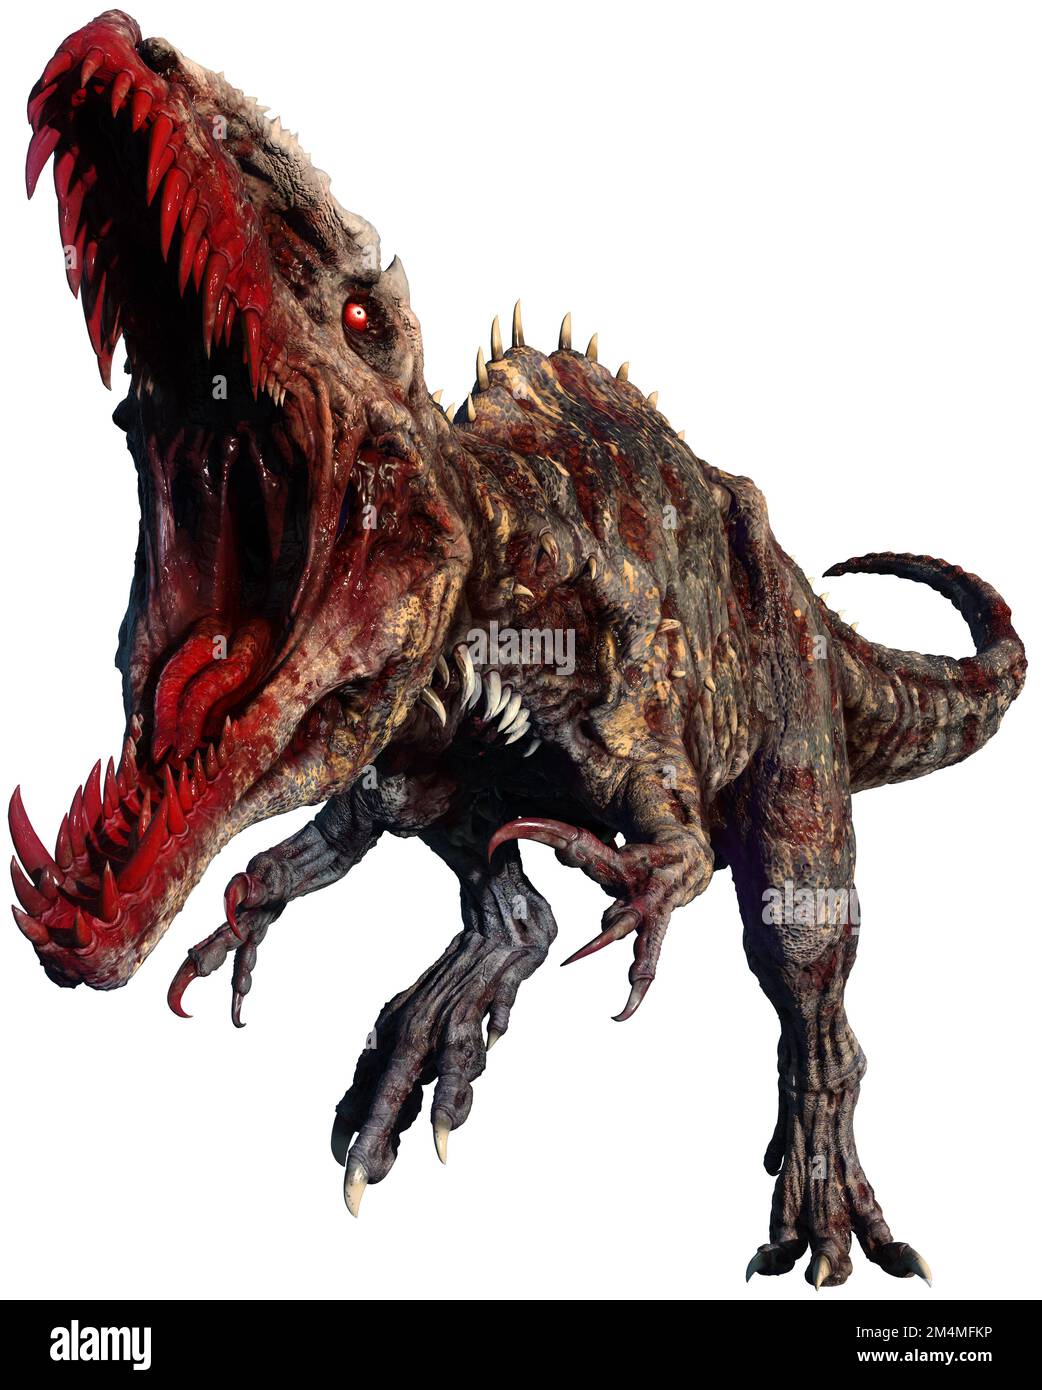 Page 82  Scary Dinosaur Images - Free Download on Freepik